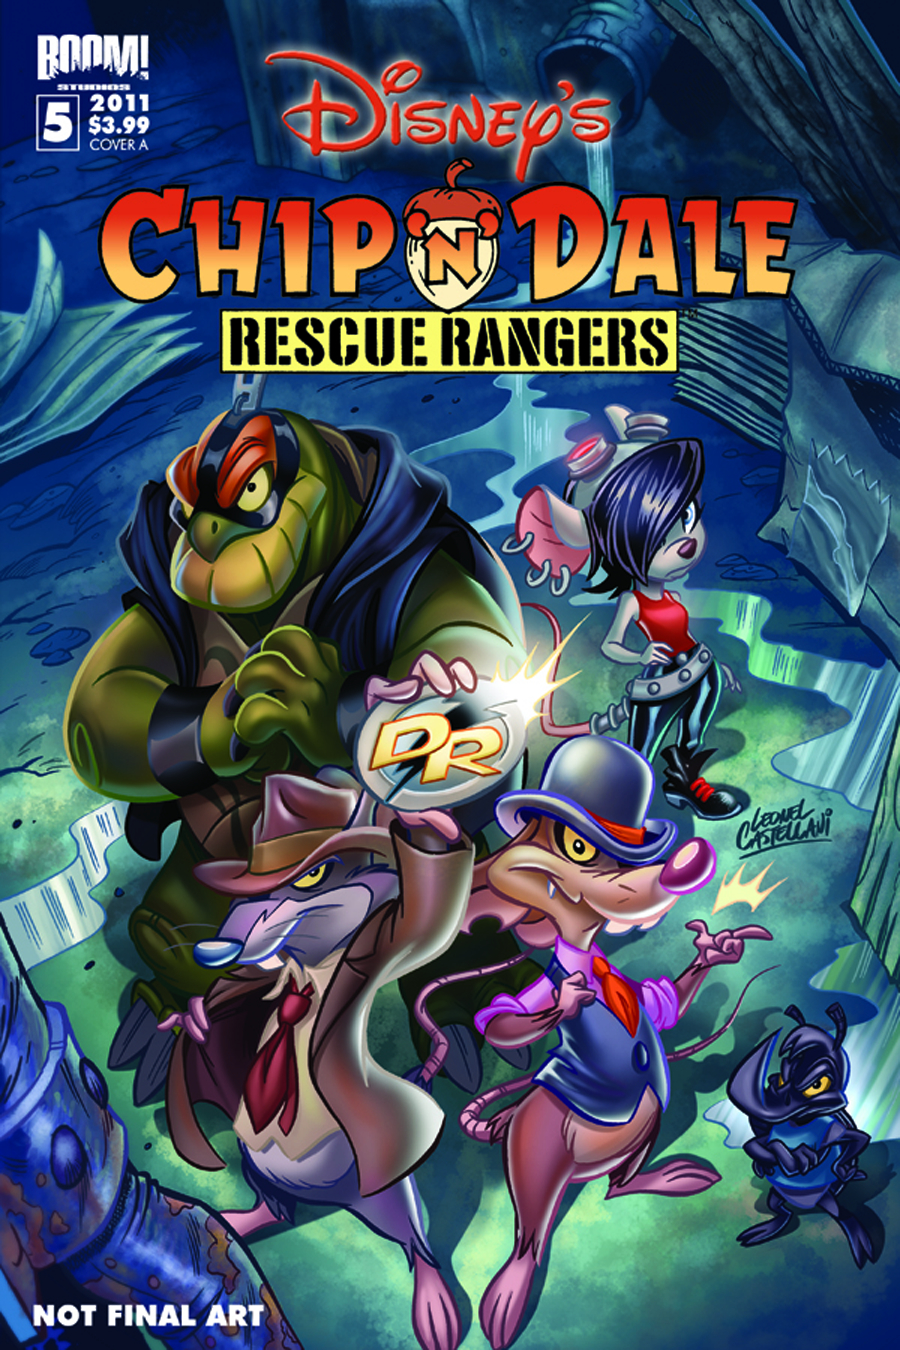 Chip and dale rescue rangers comic book